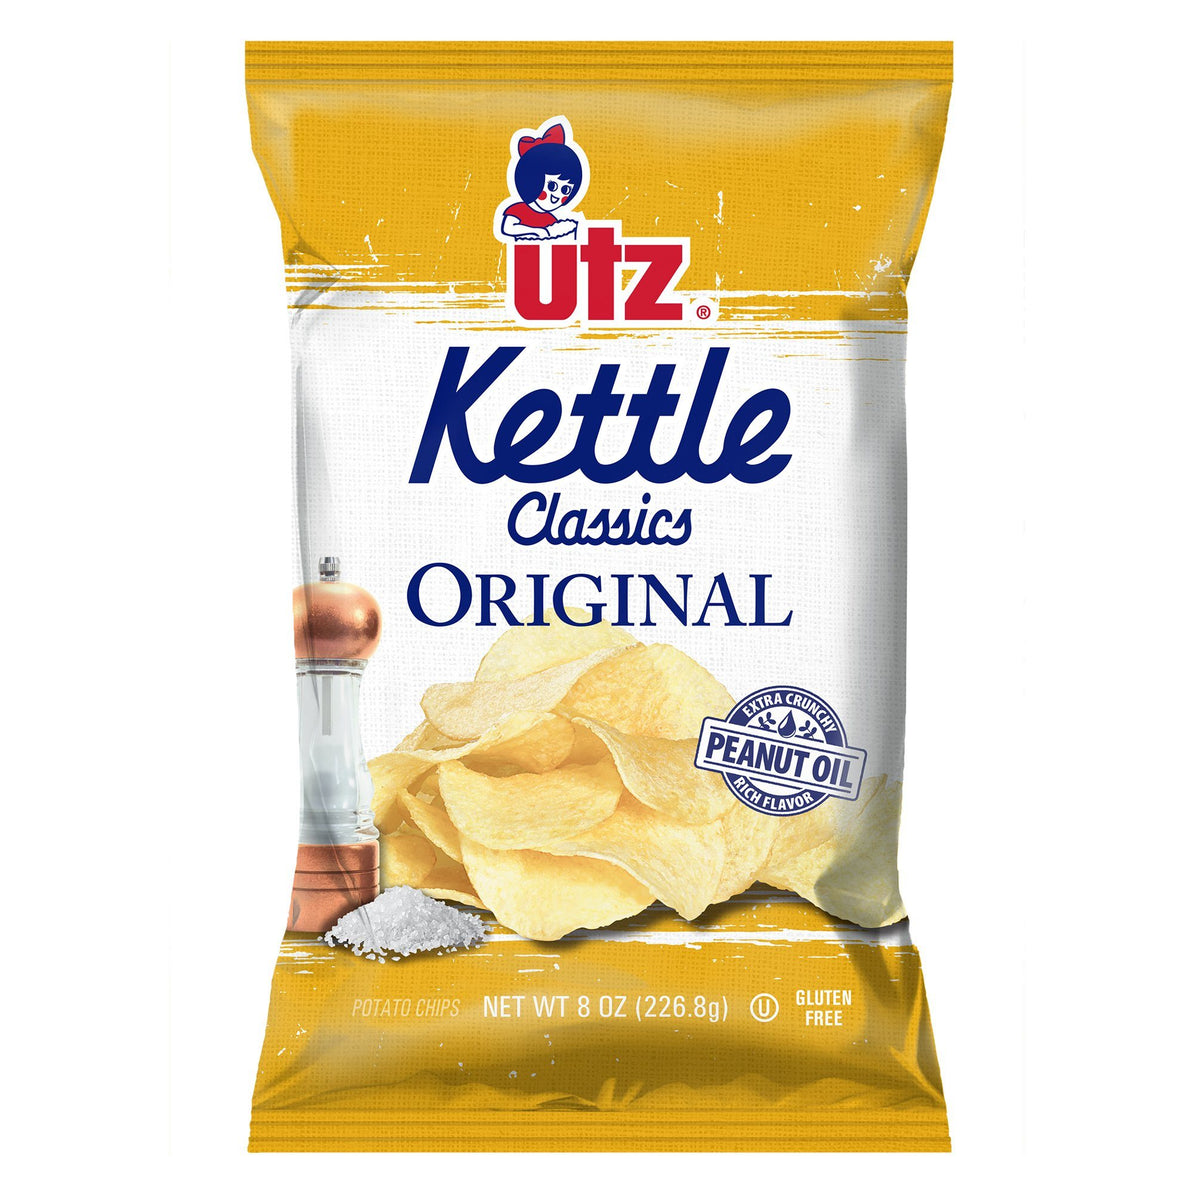 The Front of the bag of chips